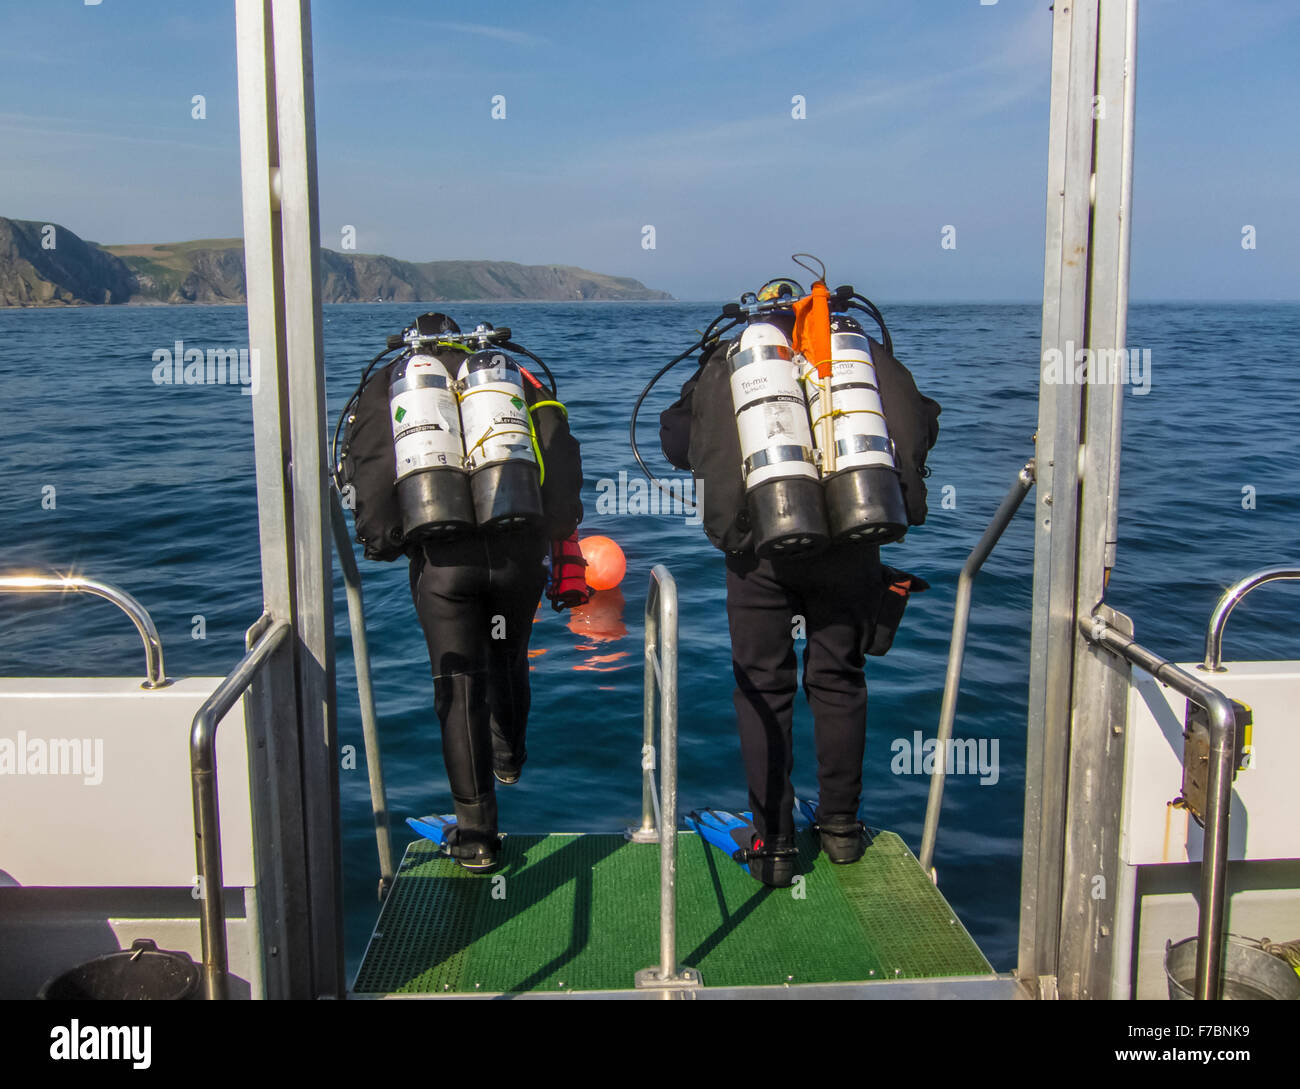 Scuba divers jump off the diving boat into the ocean, by St Abbs Scotland. Stock Photo